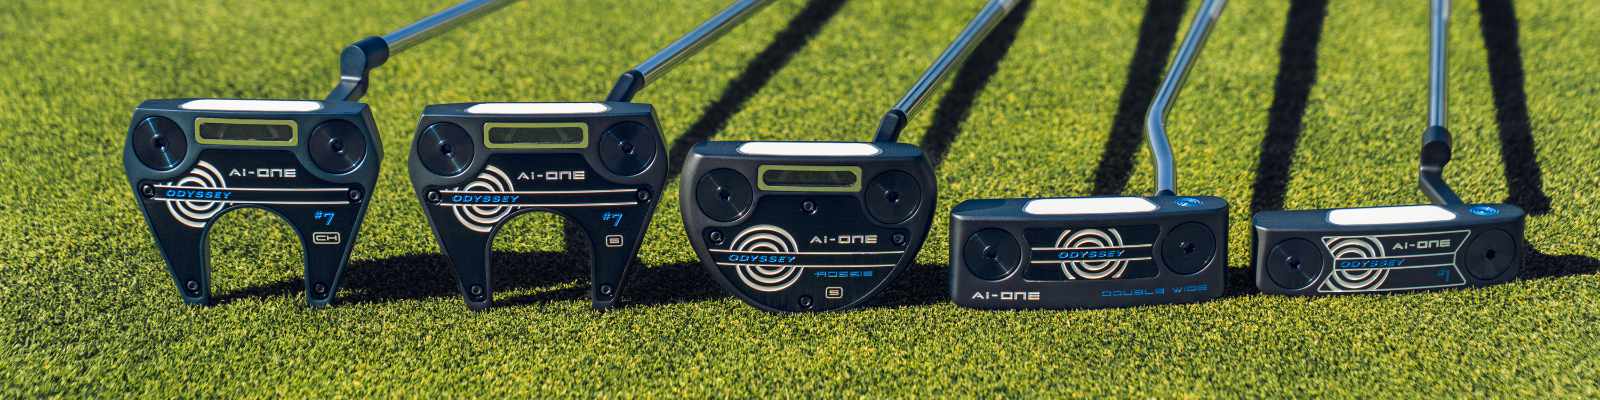 Odyssey Ai-one putter-Familie (photo by Callaway Golf)